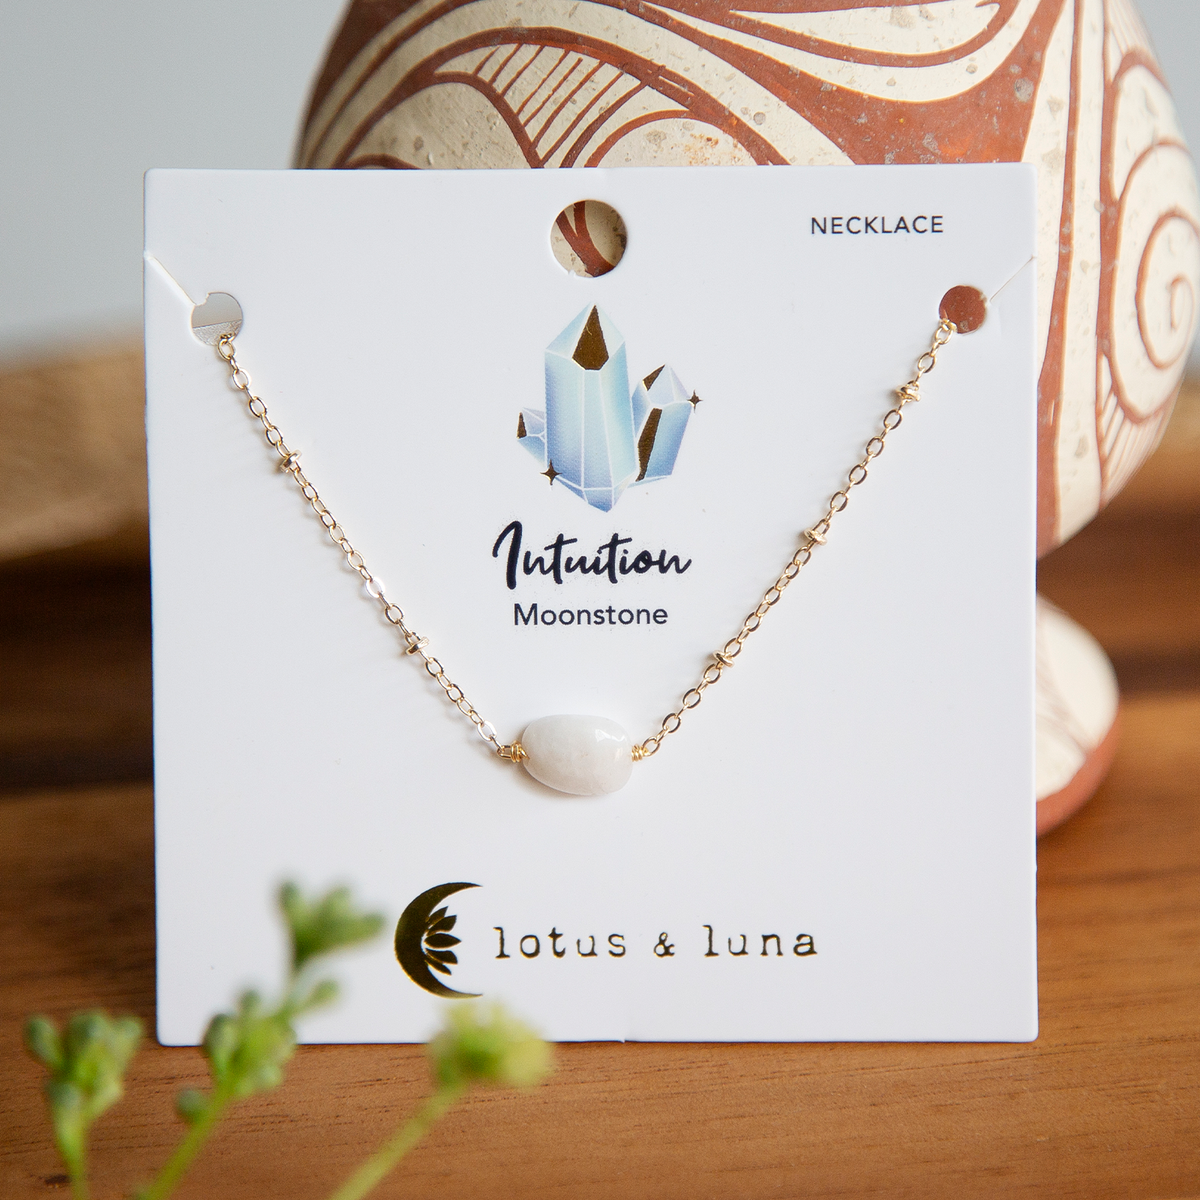 Moonstone healing necklace with gold chain on jewelry card